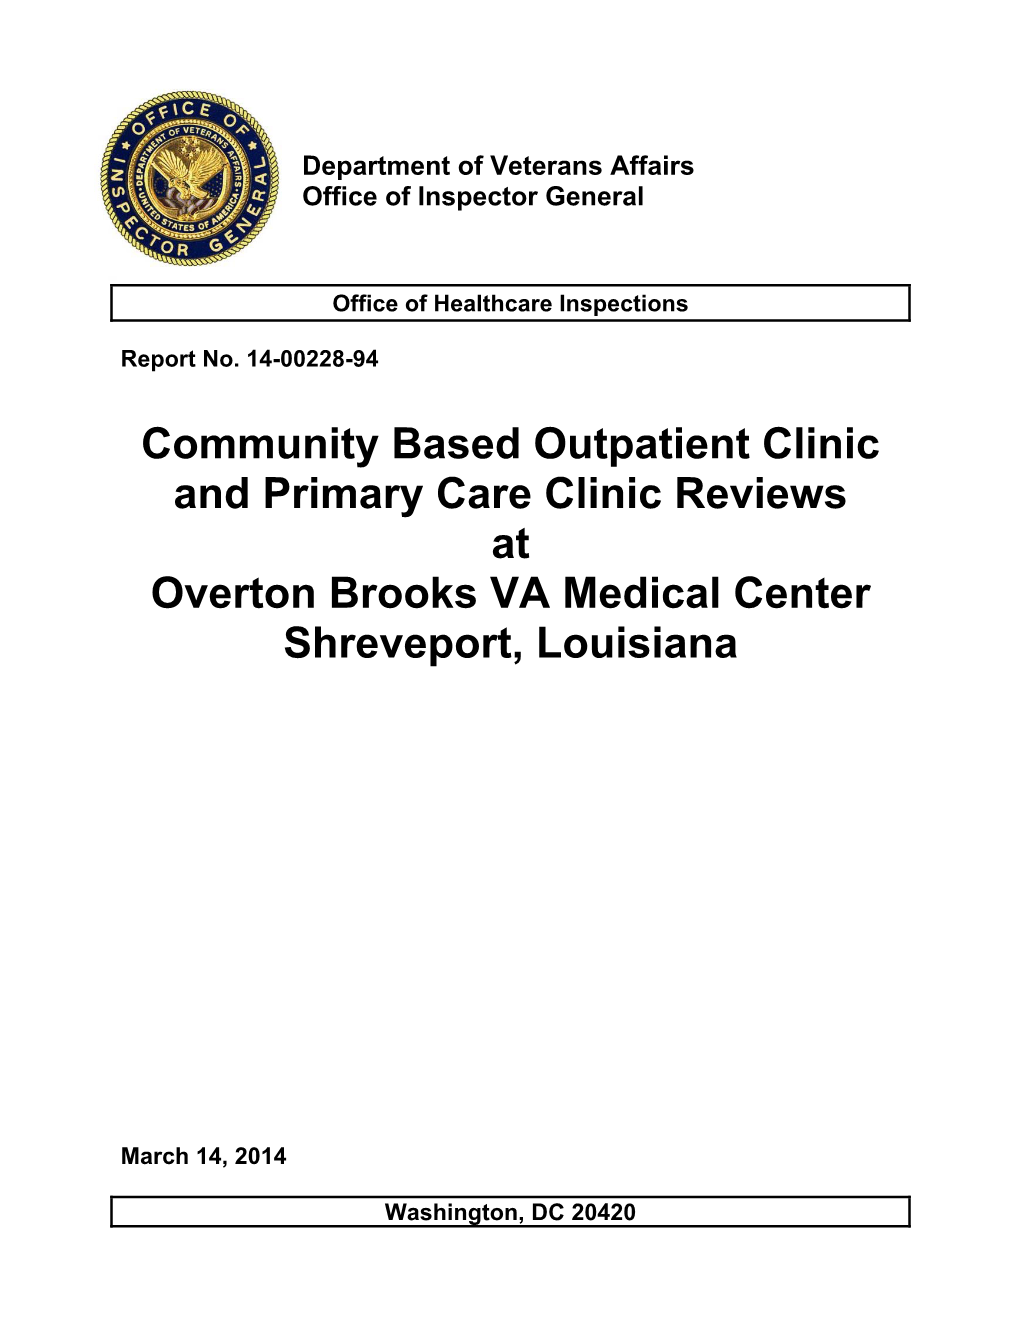 Community Based Outpatient Clinic and Primary Care Clinic Reviews at Overton Brooks VA Medical Center Shreveport, Louisiana